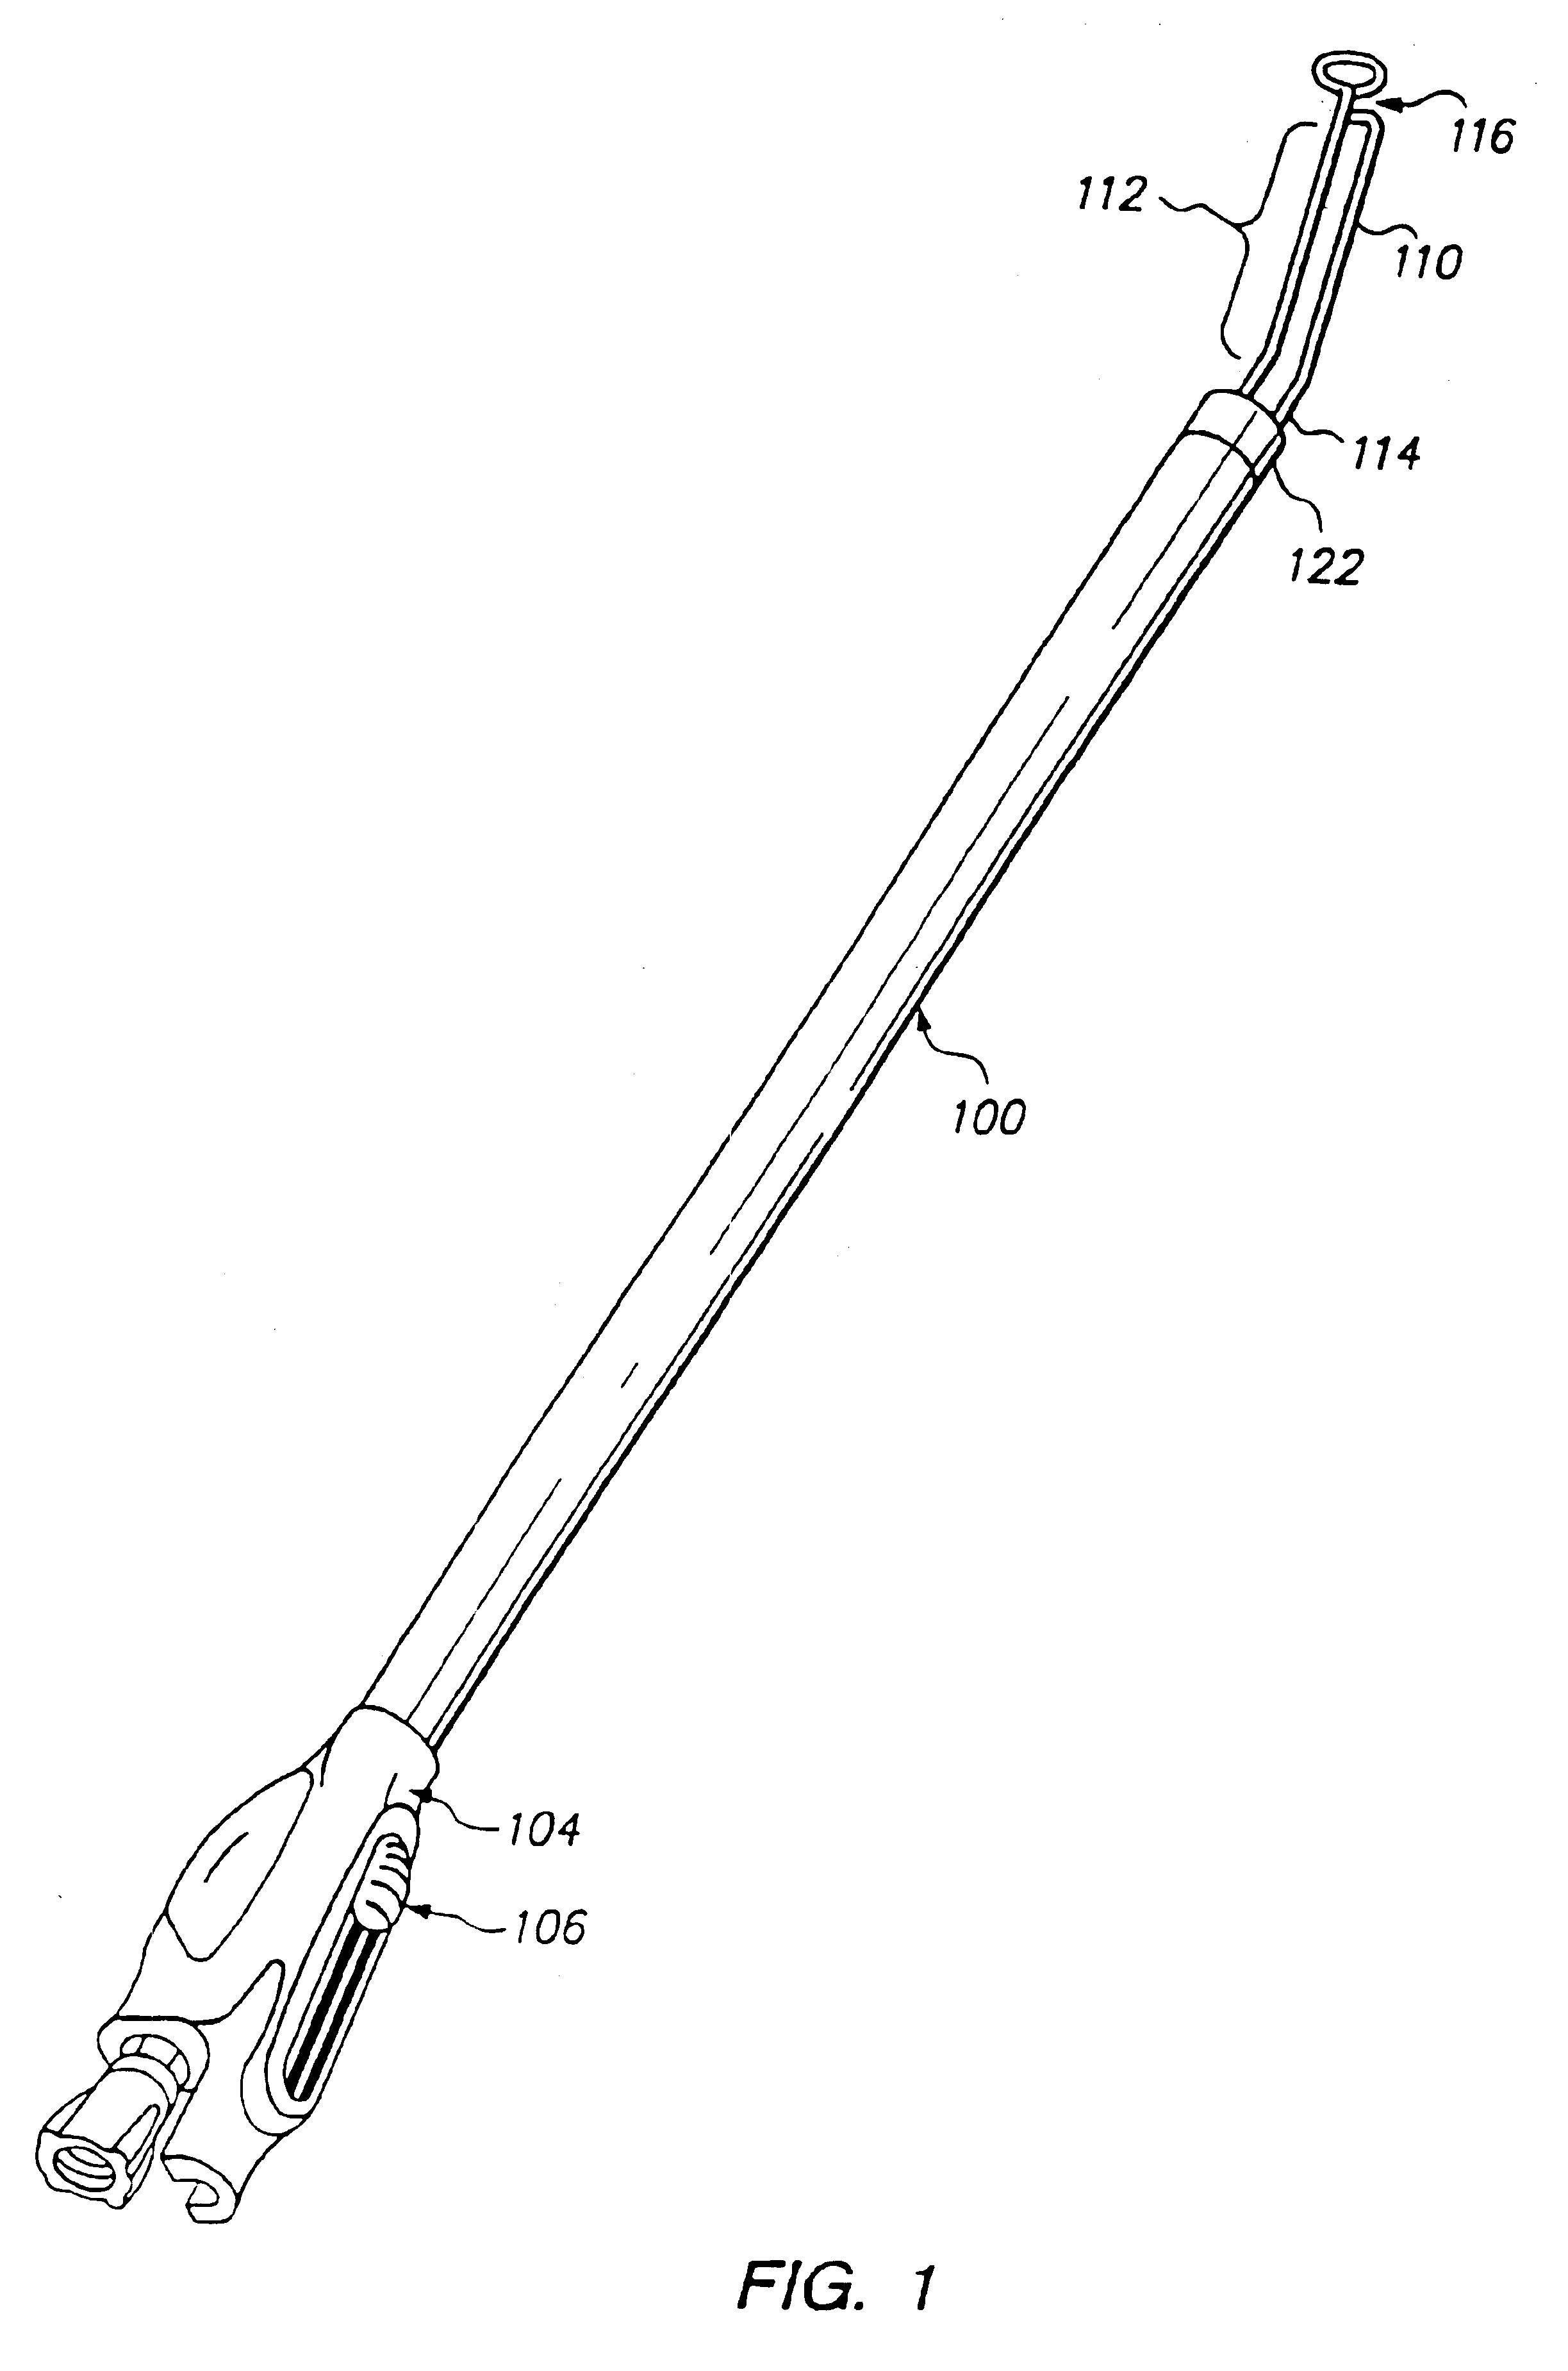 Cannula-based surgical instrument and method